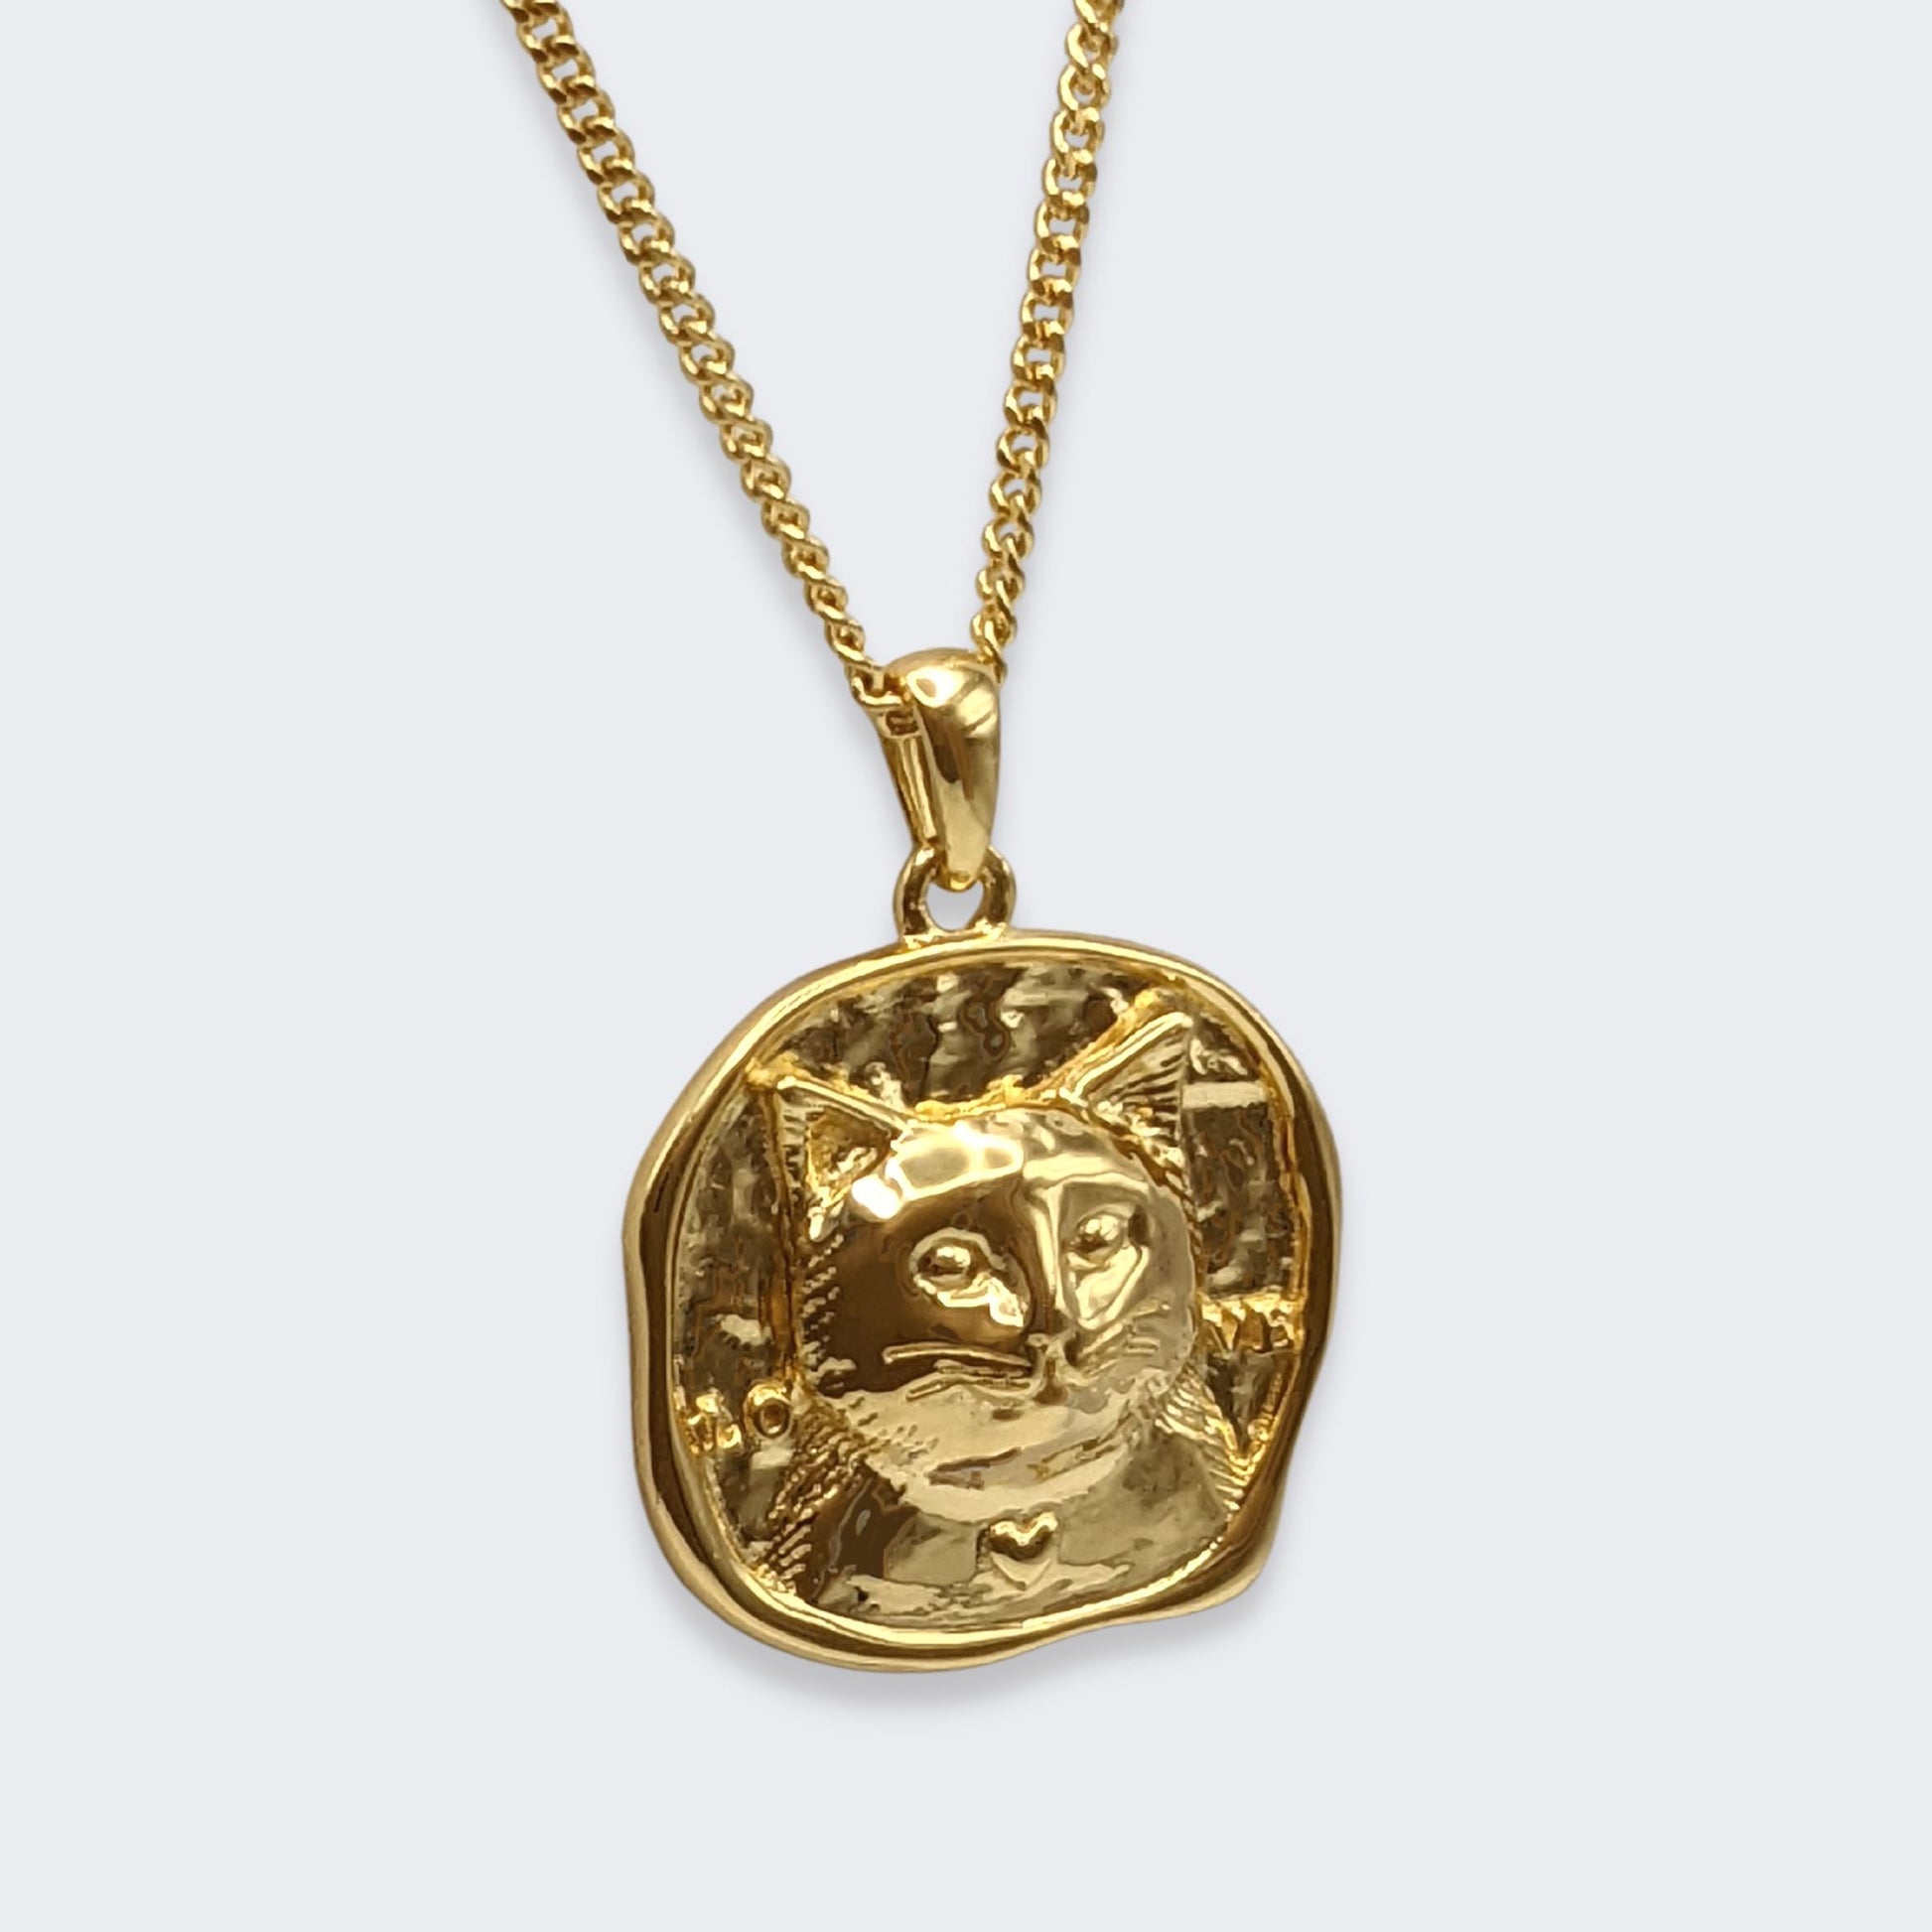 lars cat coin necklace in 18k gold vermeil (right side view)